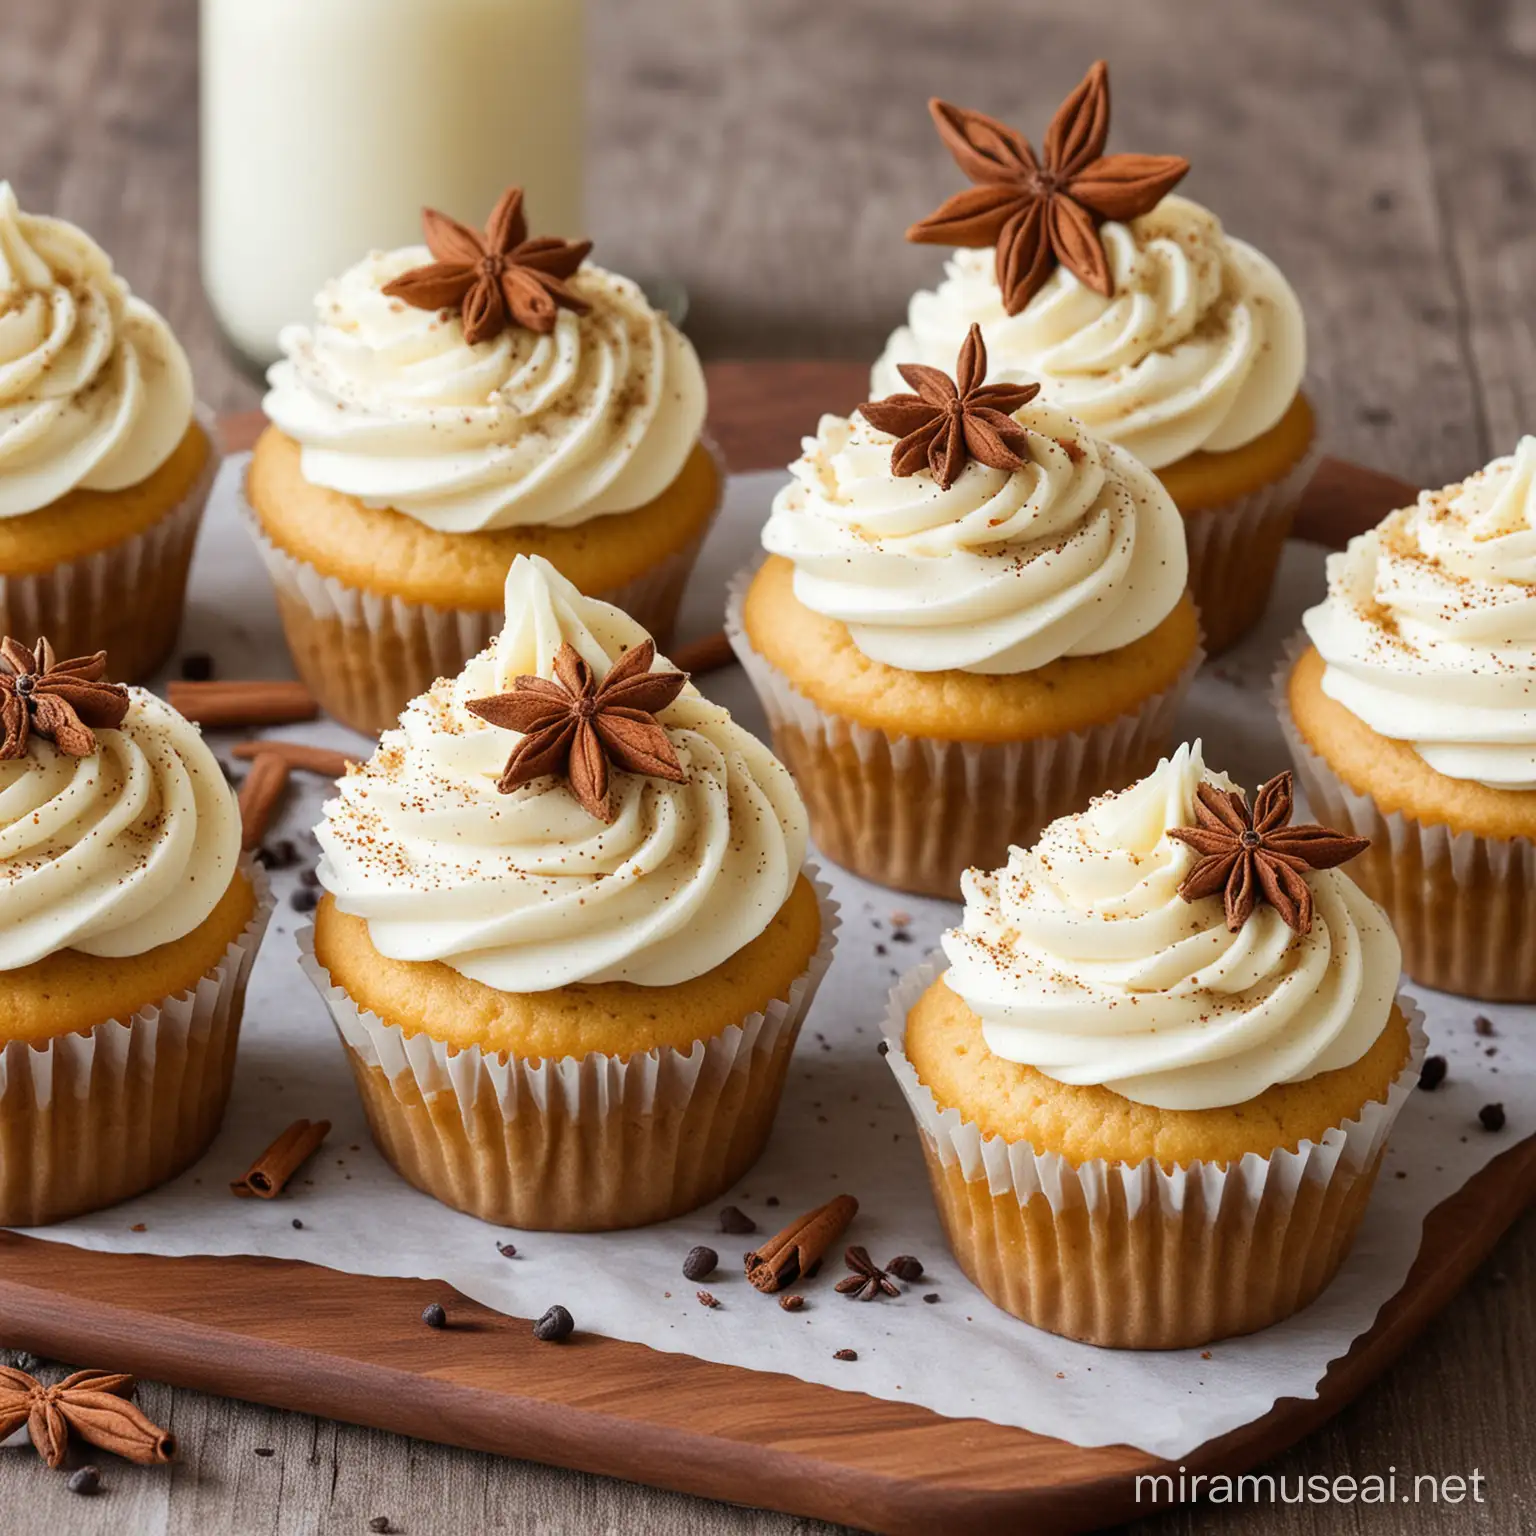 Delicious Mixed Spice Vanilla Cupcakes with Decorative Frosting